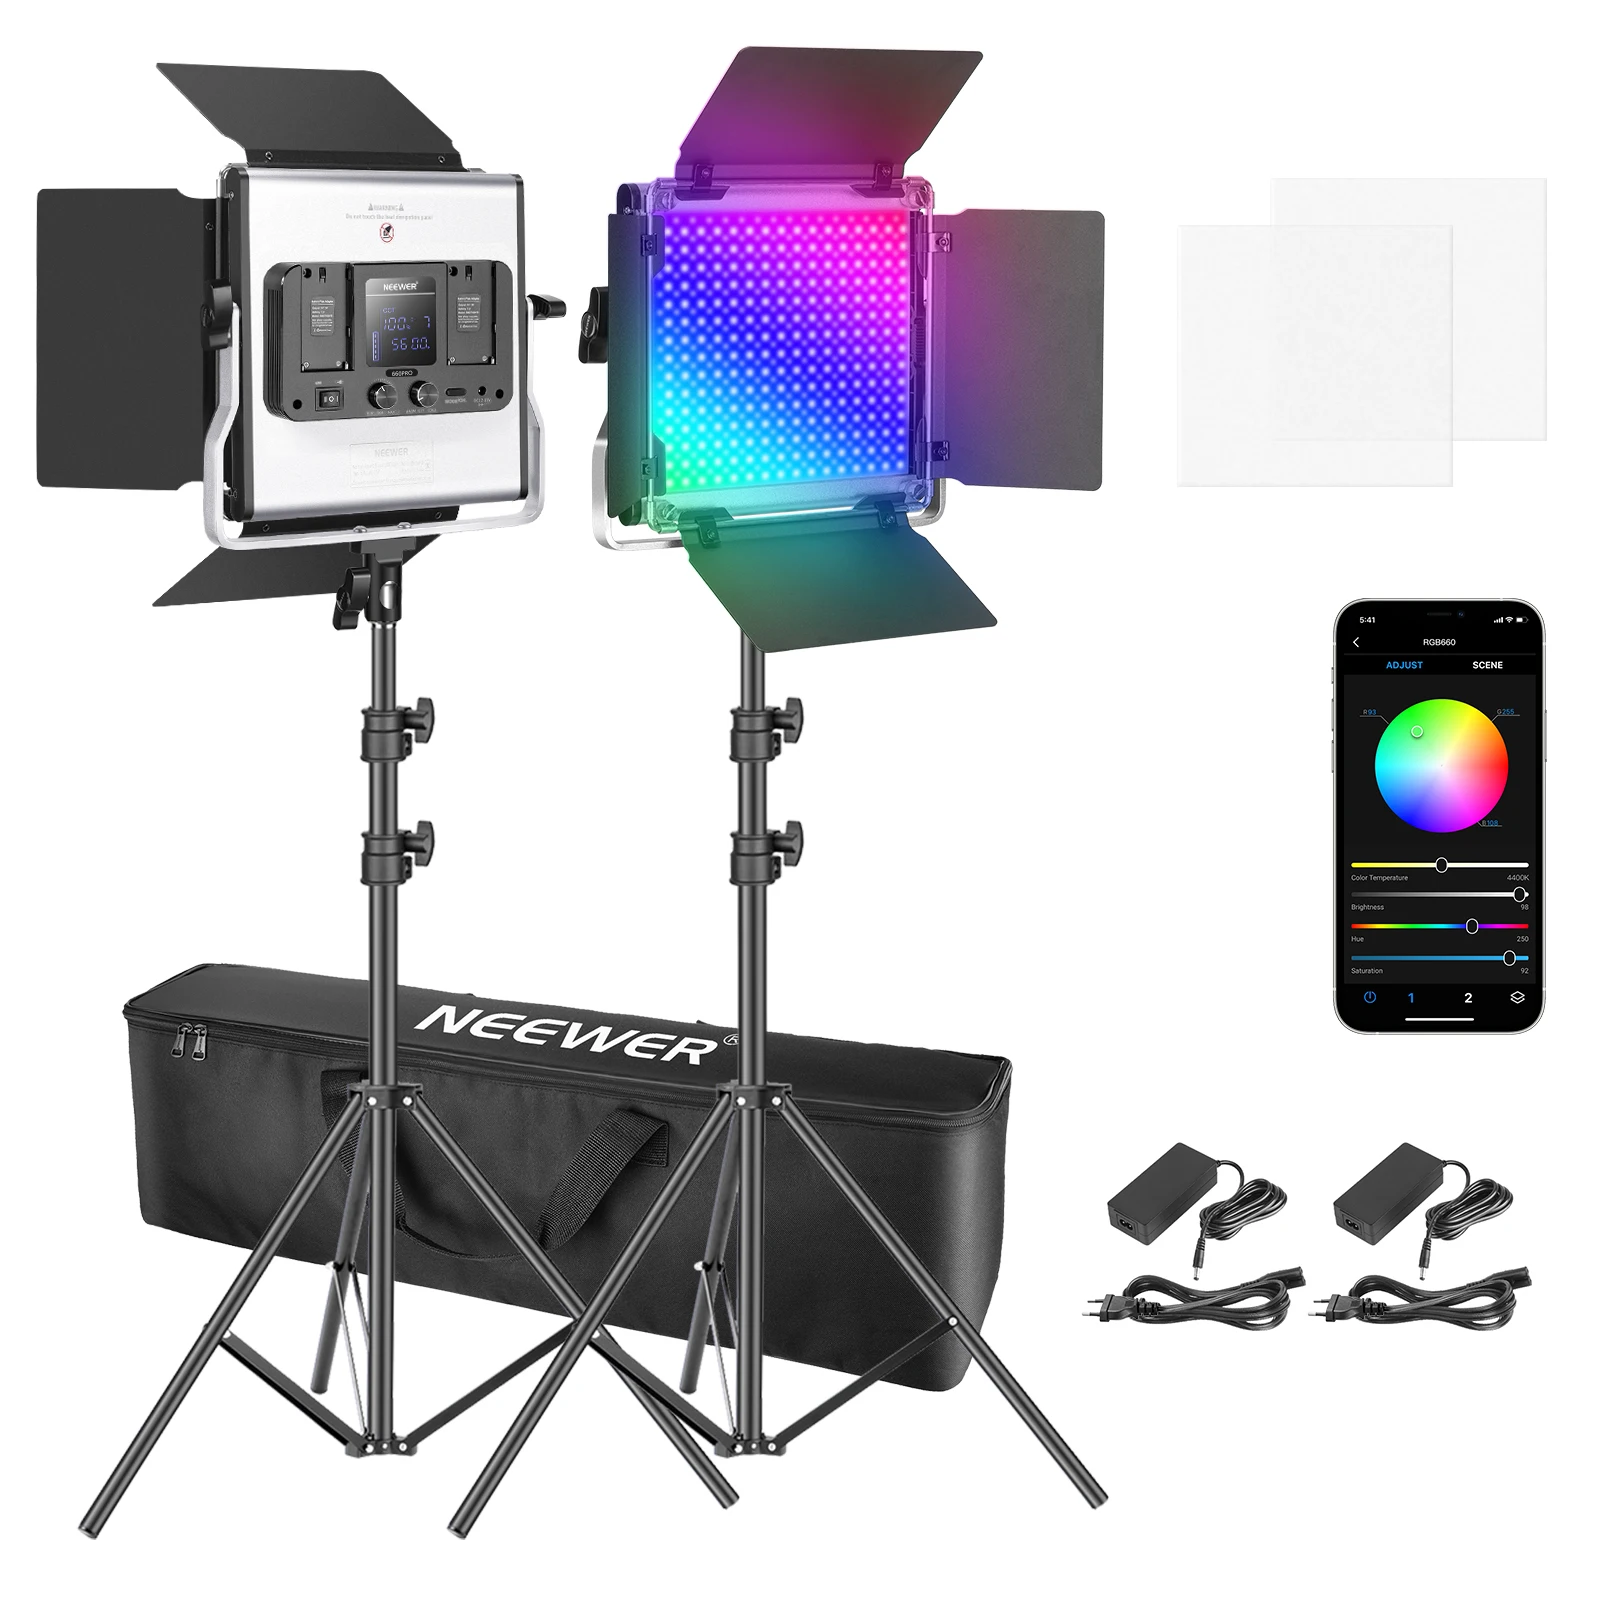 

Neewer 660 RGB Led Light With APP Control, Photography Video Lighting Kit With Stands And Bag, 660 SMD LEDs CRI95